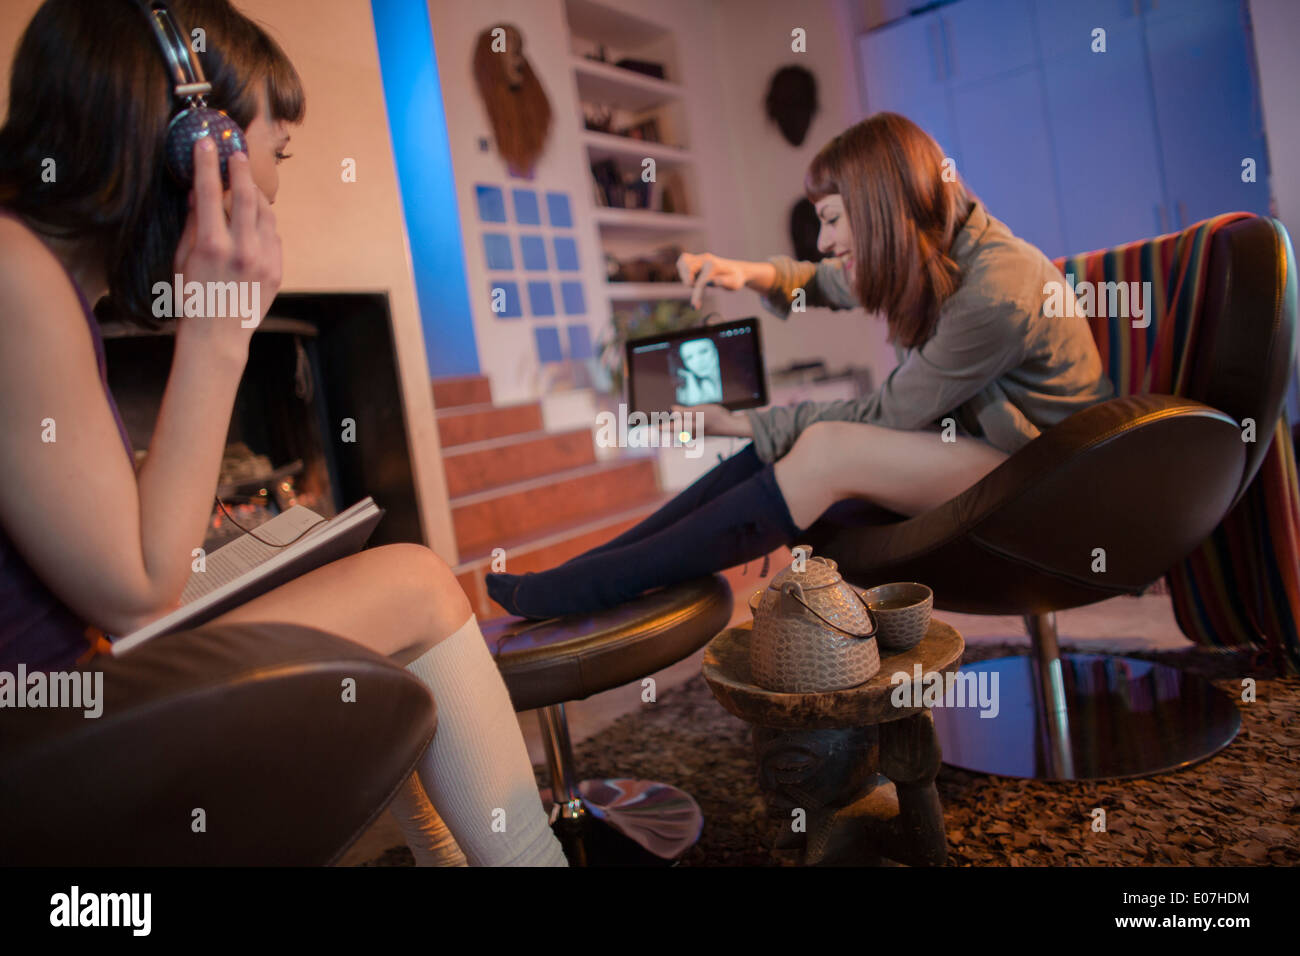 Two young women relaxing at home looking at digital tablet Stock Photo